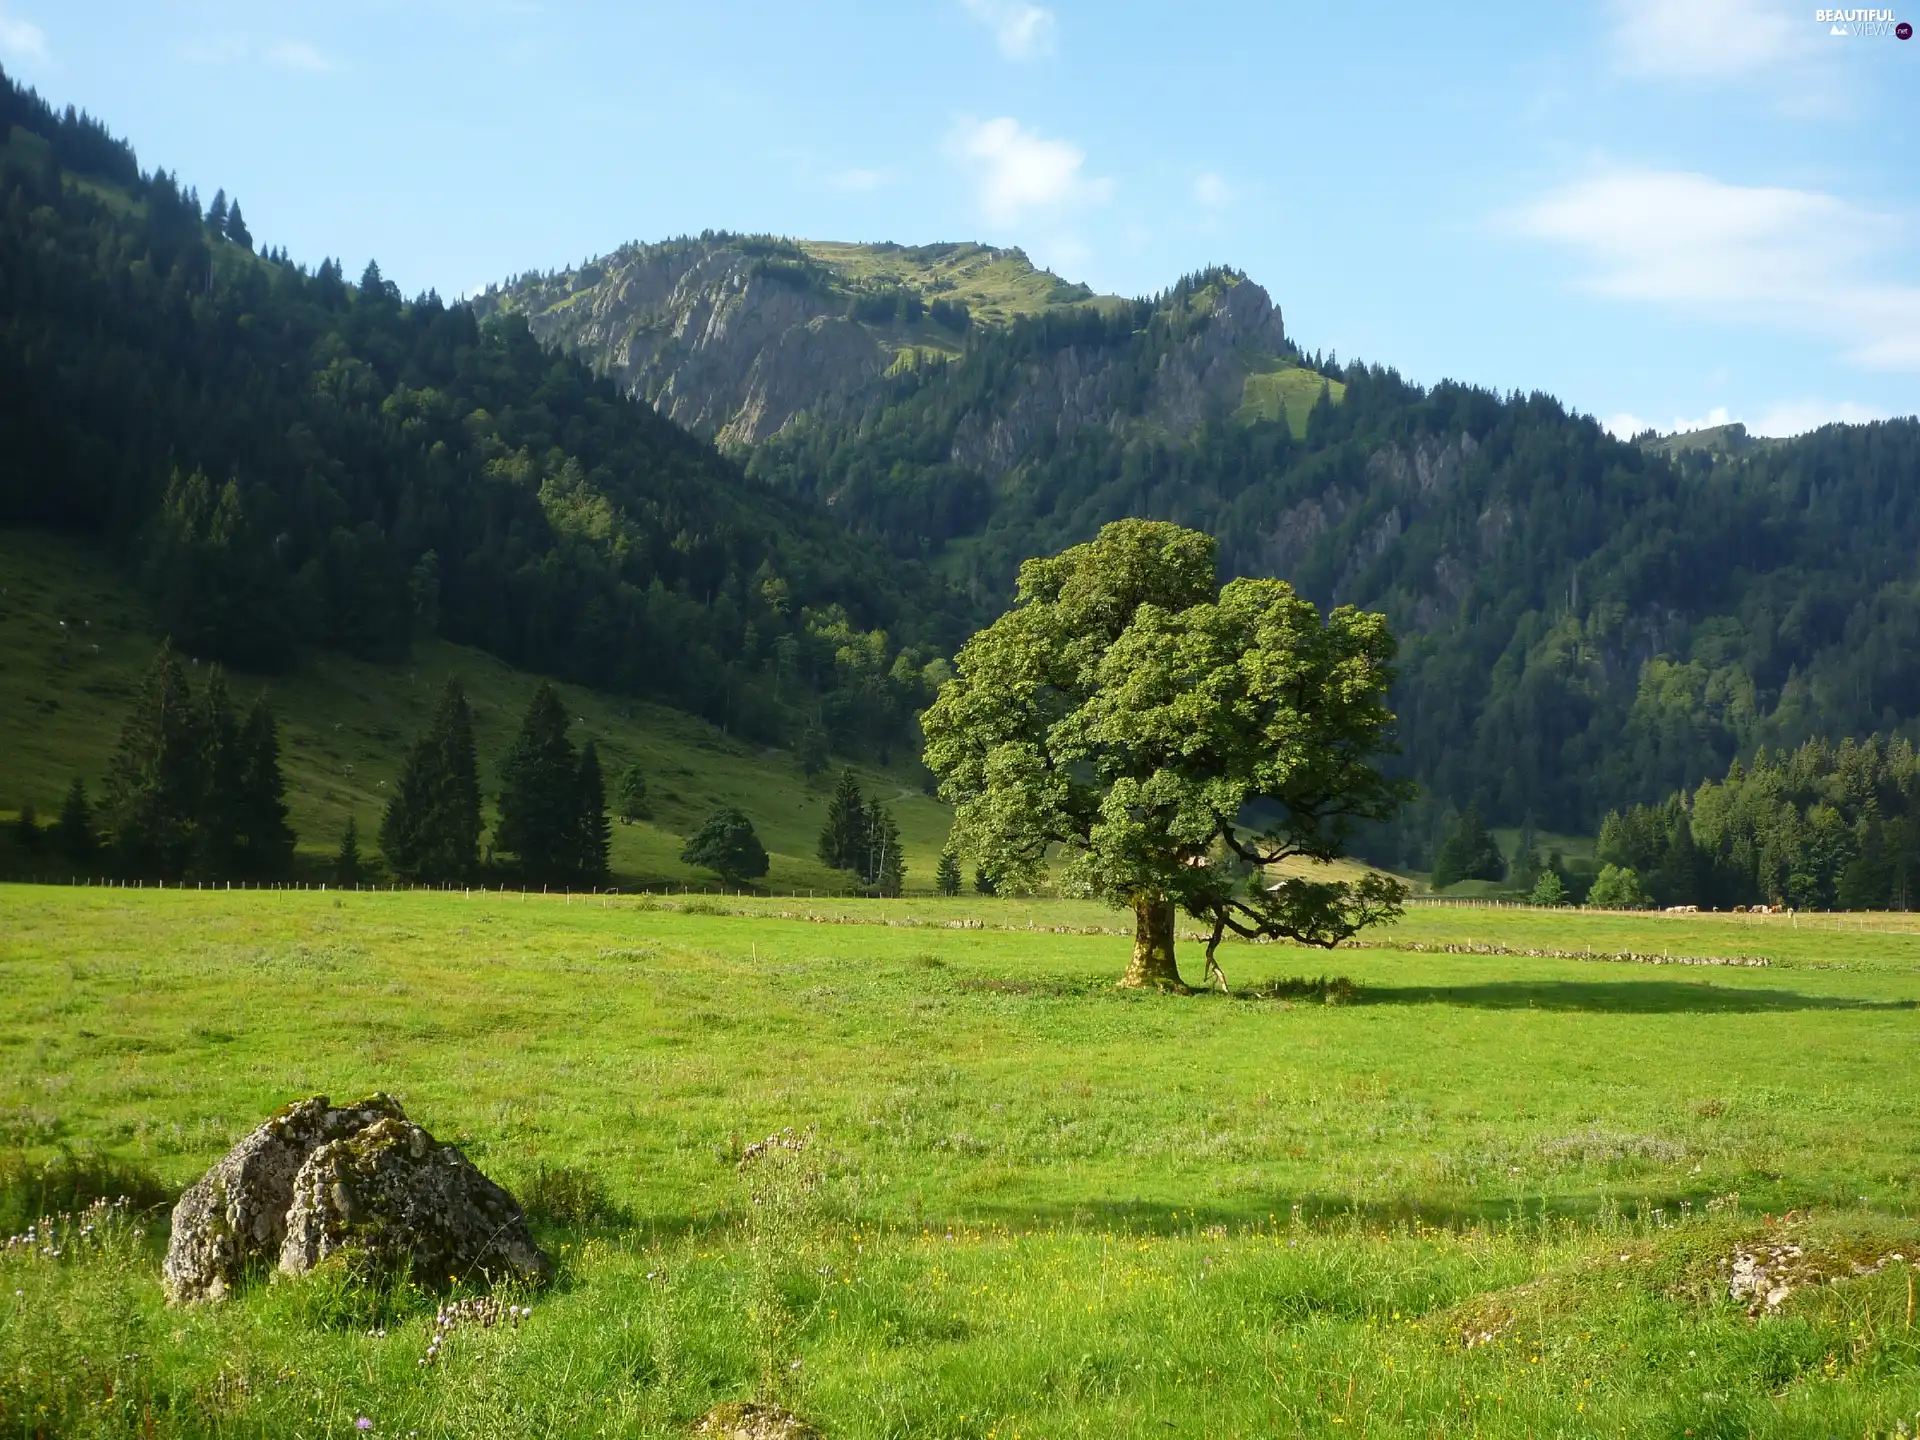 Meadow, forested, Mountains, trees